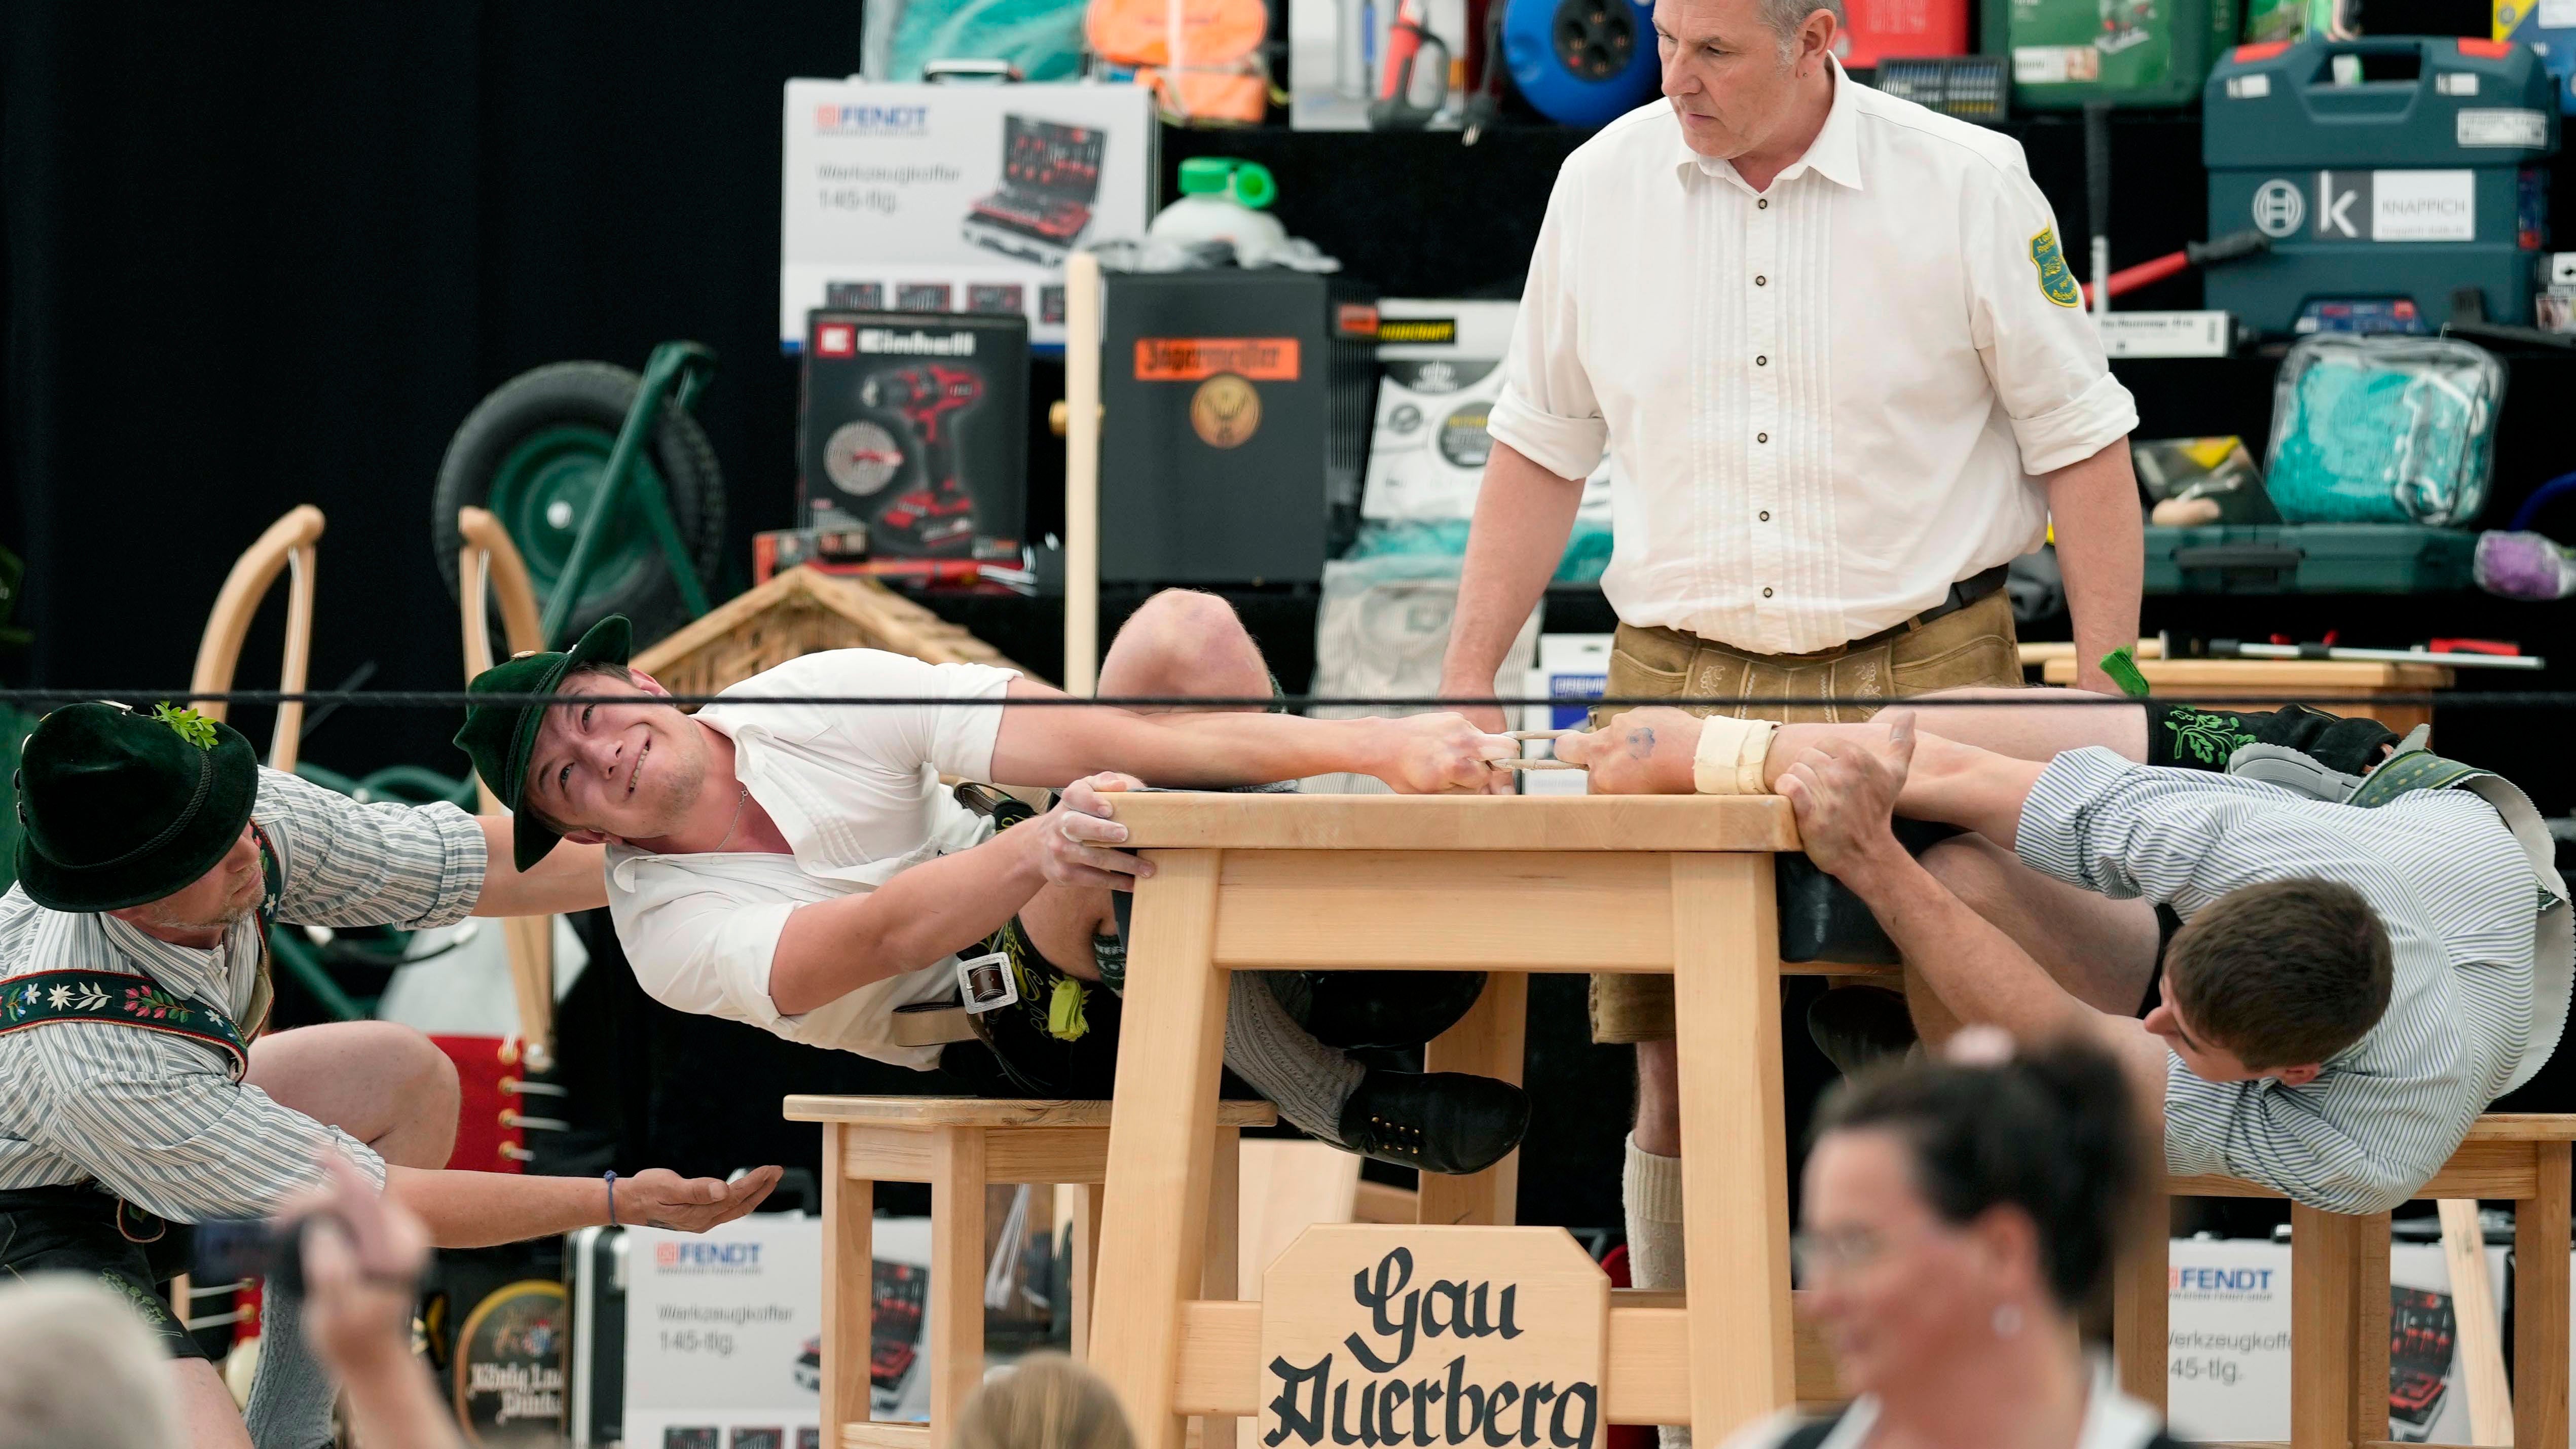 A man dressed in traditional clothes tries to pull his opponent over the table at the German Championships